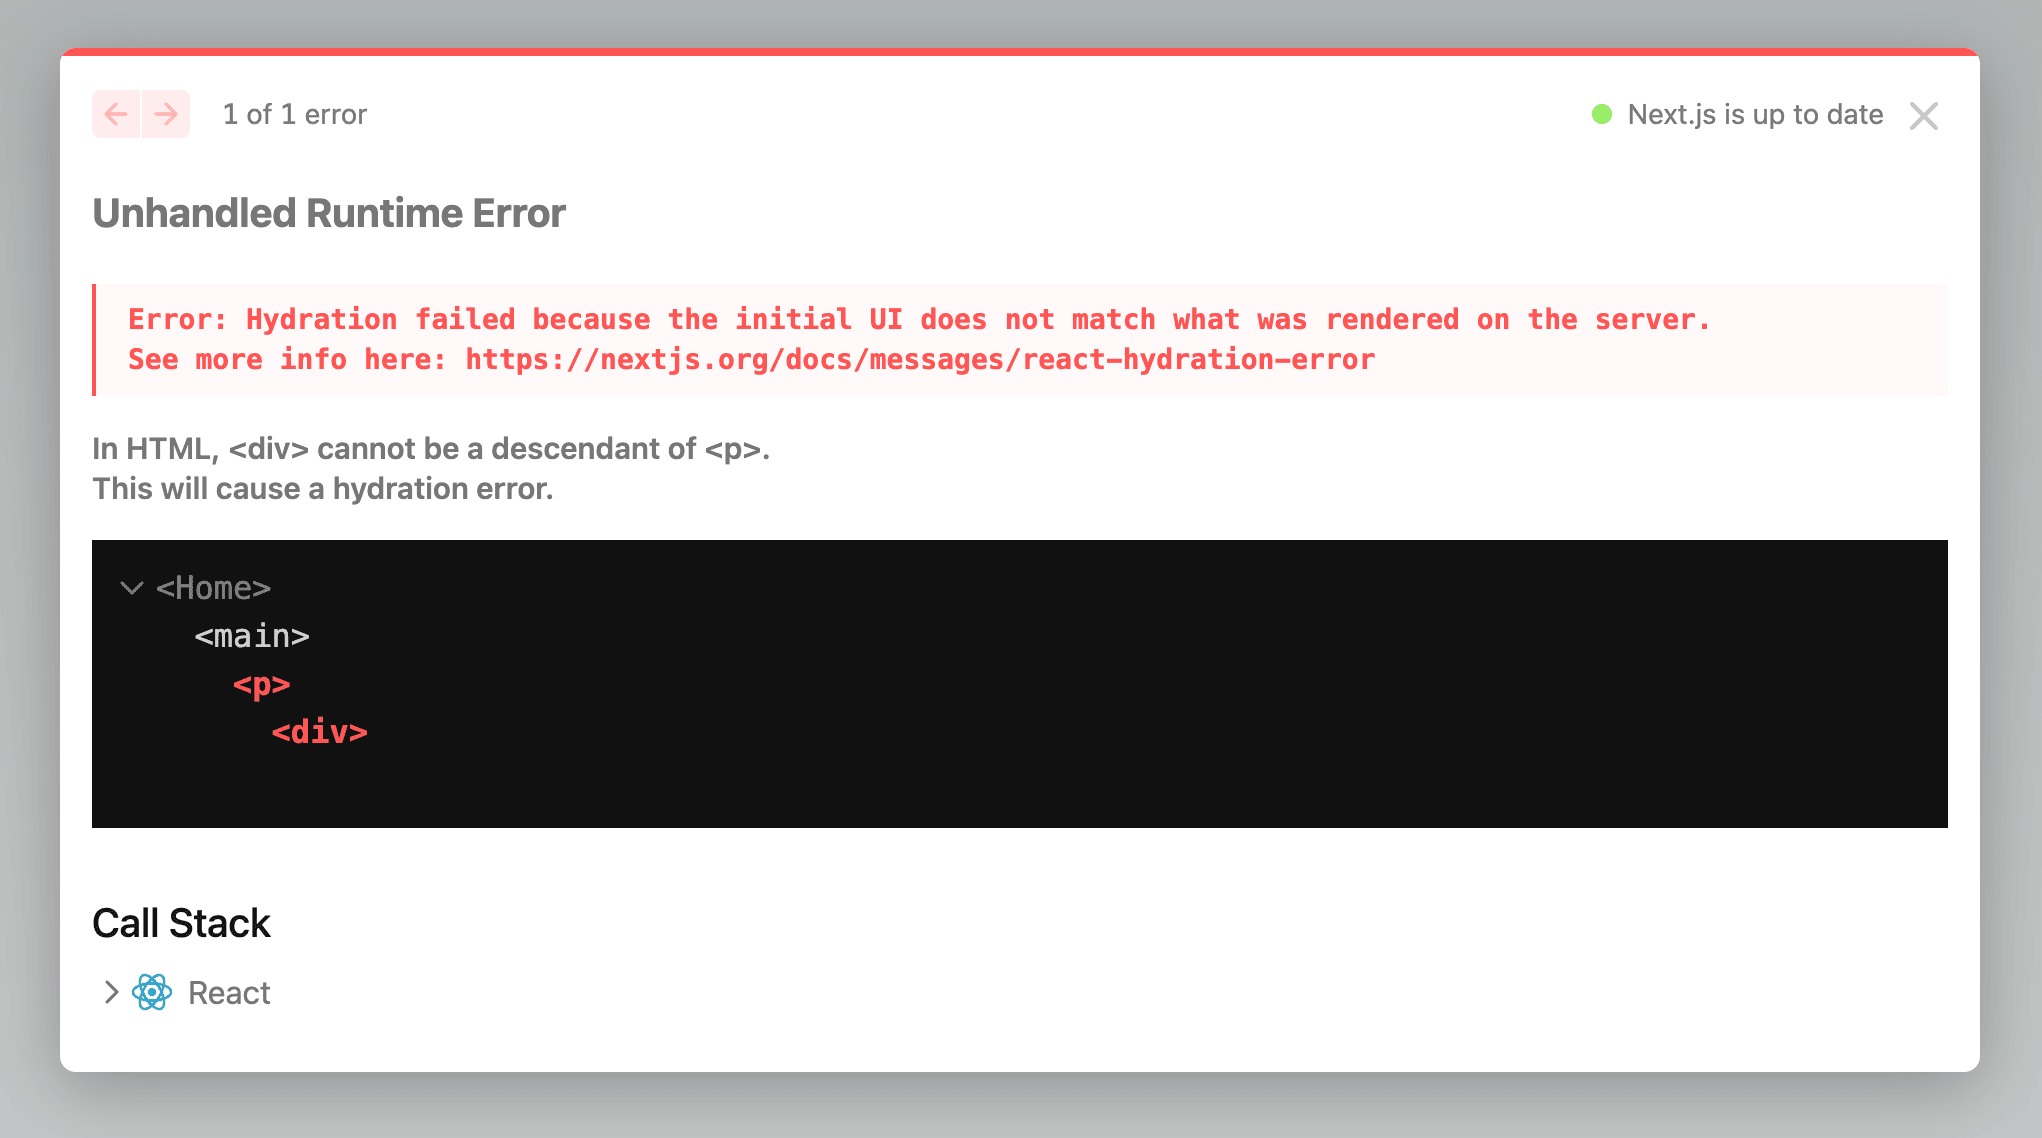 An example of the Next.js error overlay after version 14.2.